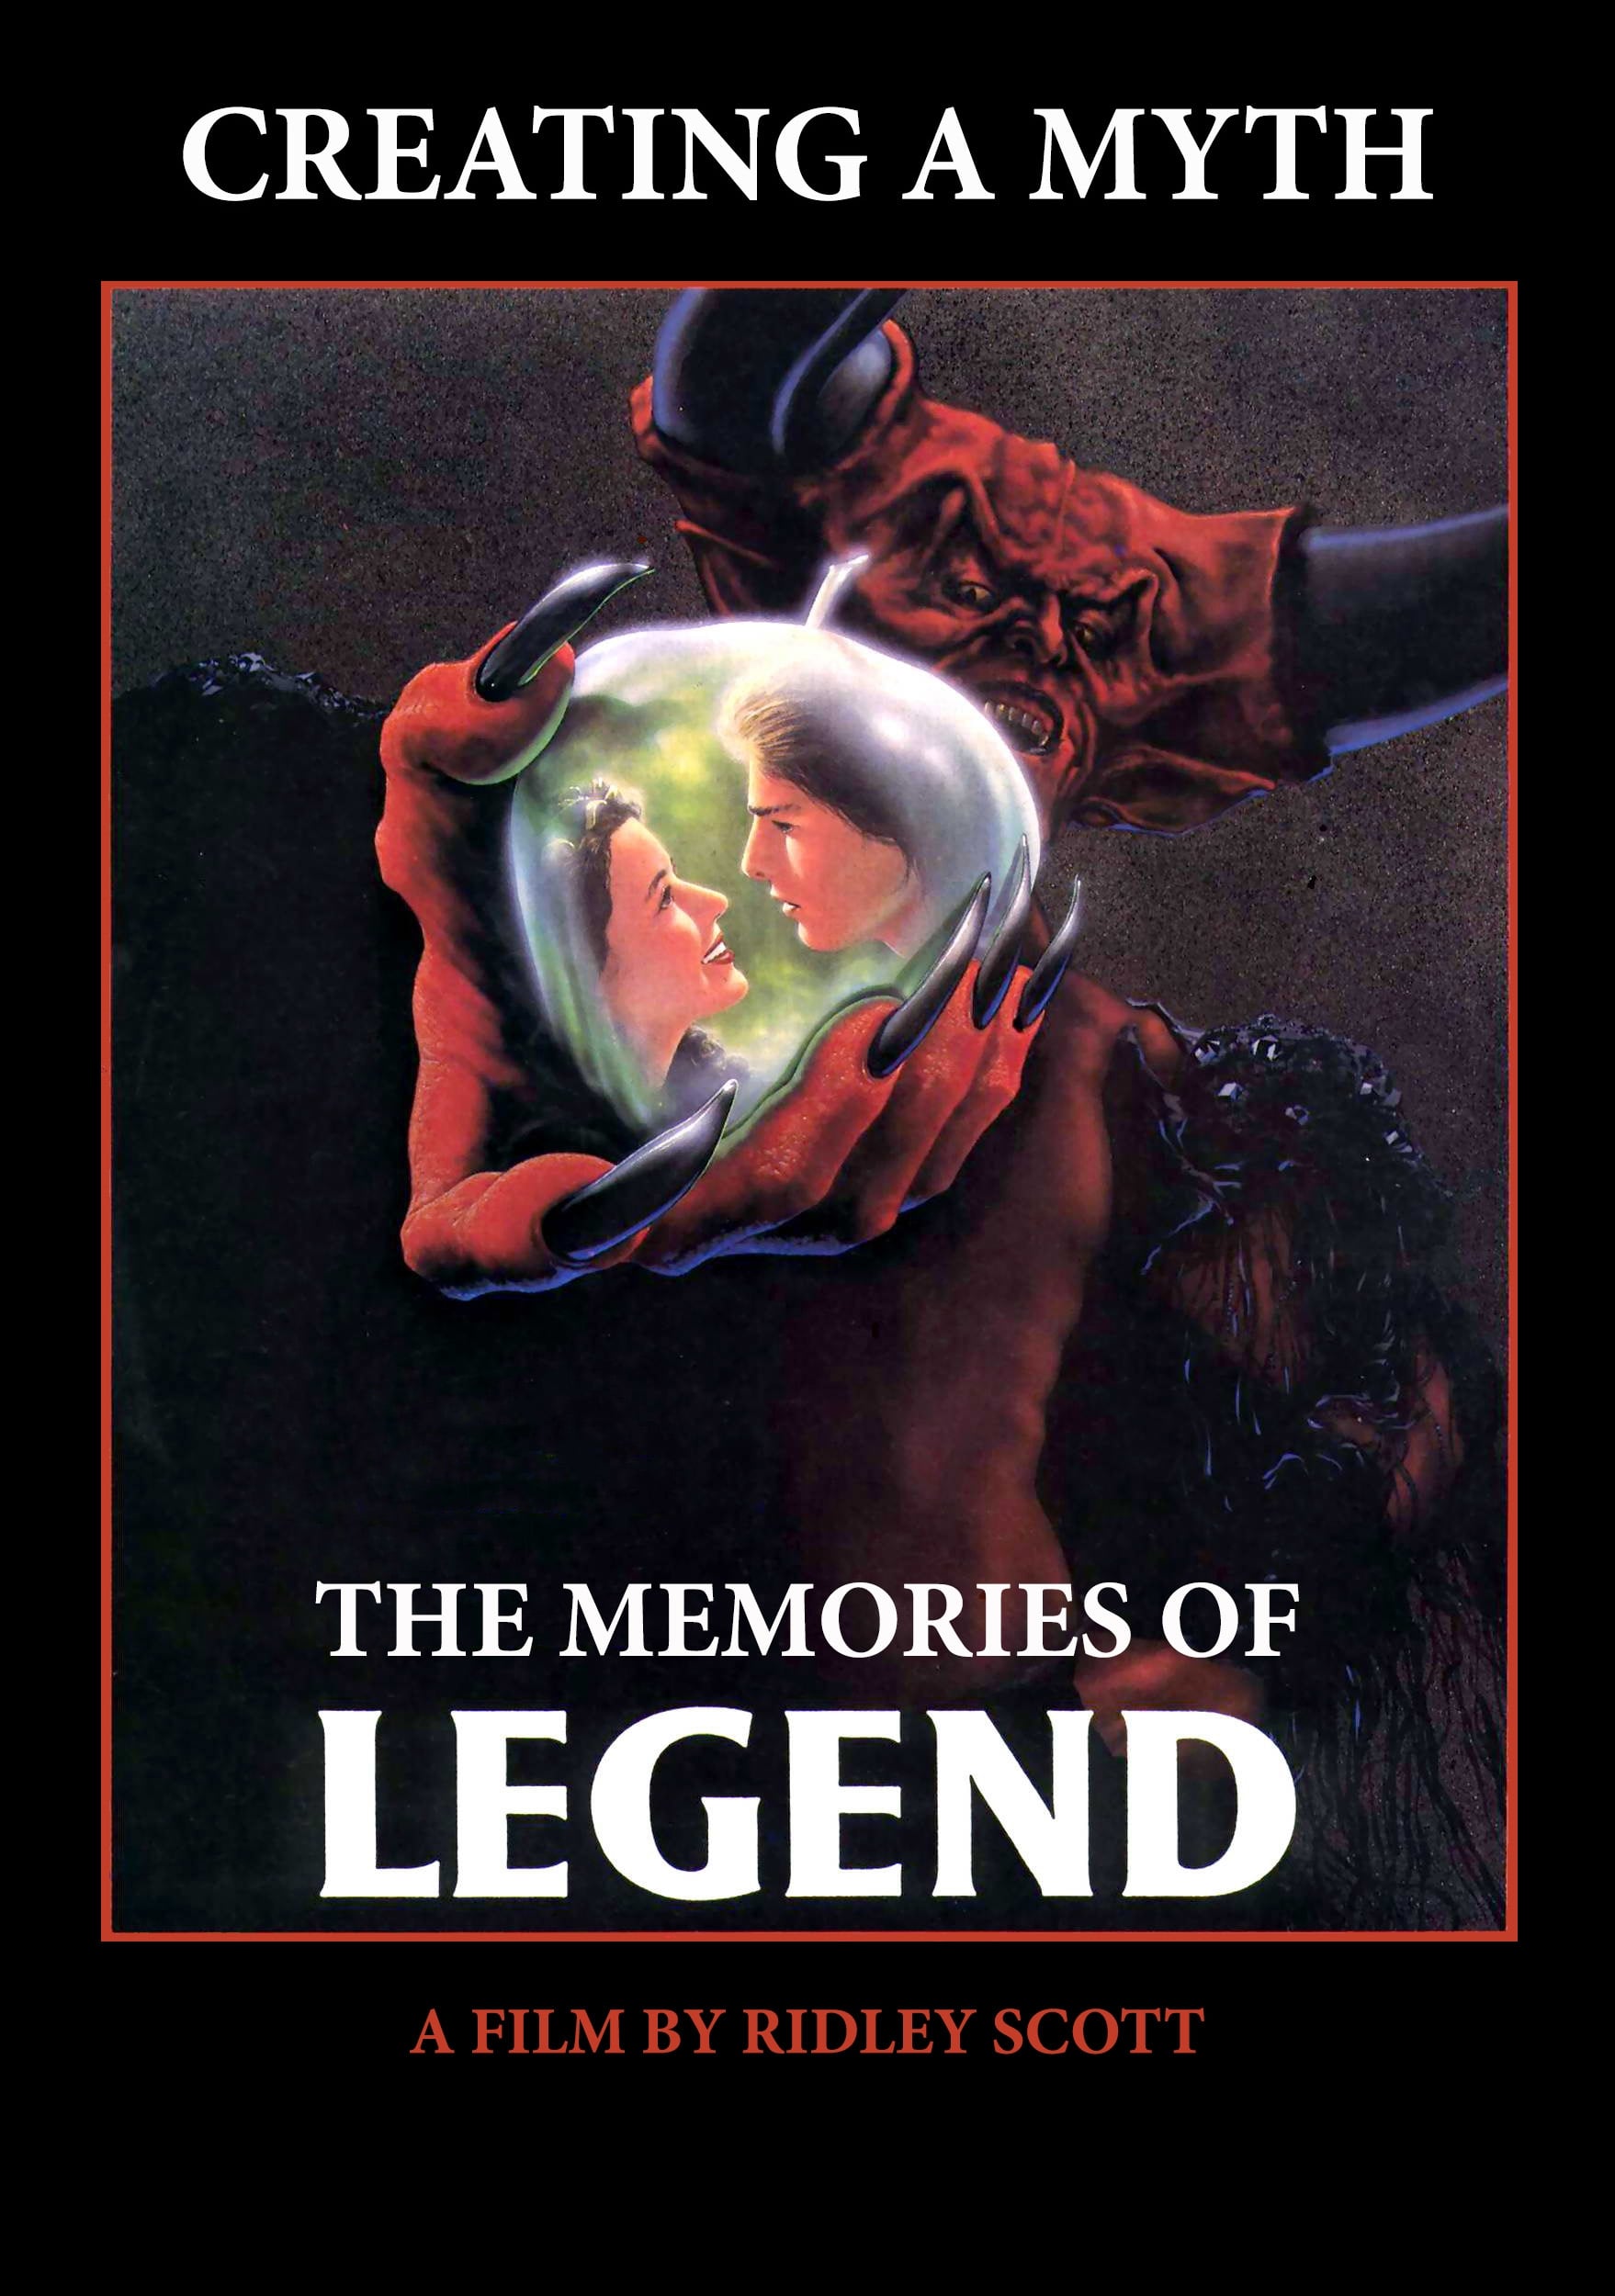 Creating a Myth... the Memories of 'Legend' (2002)